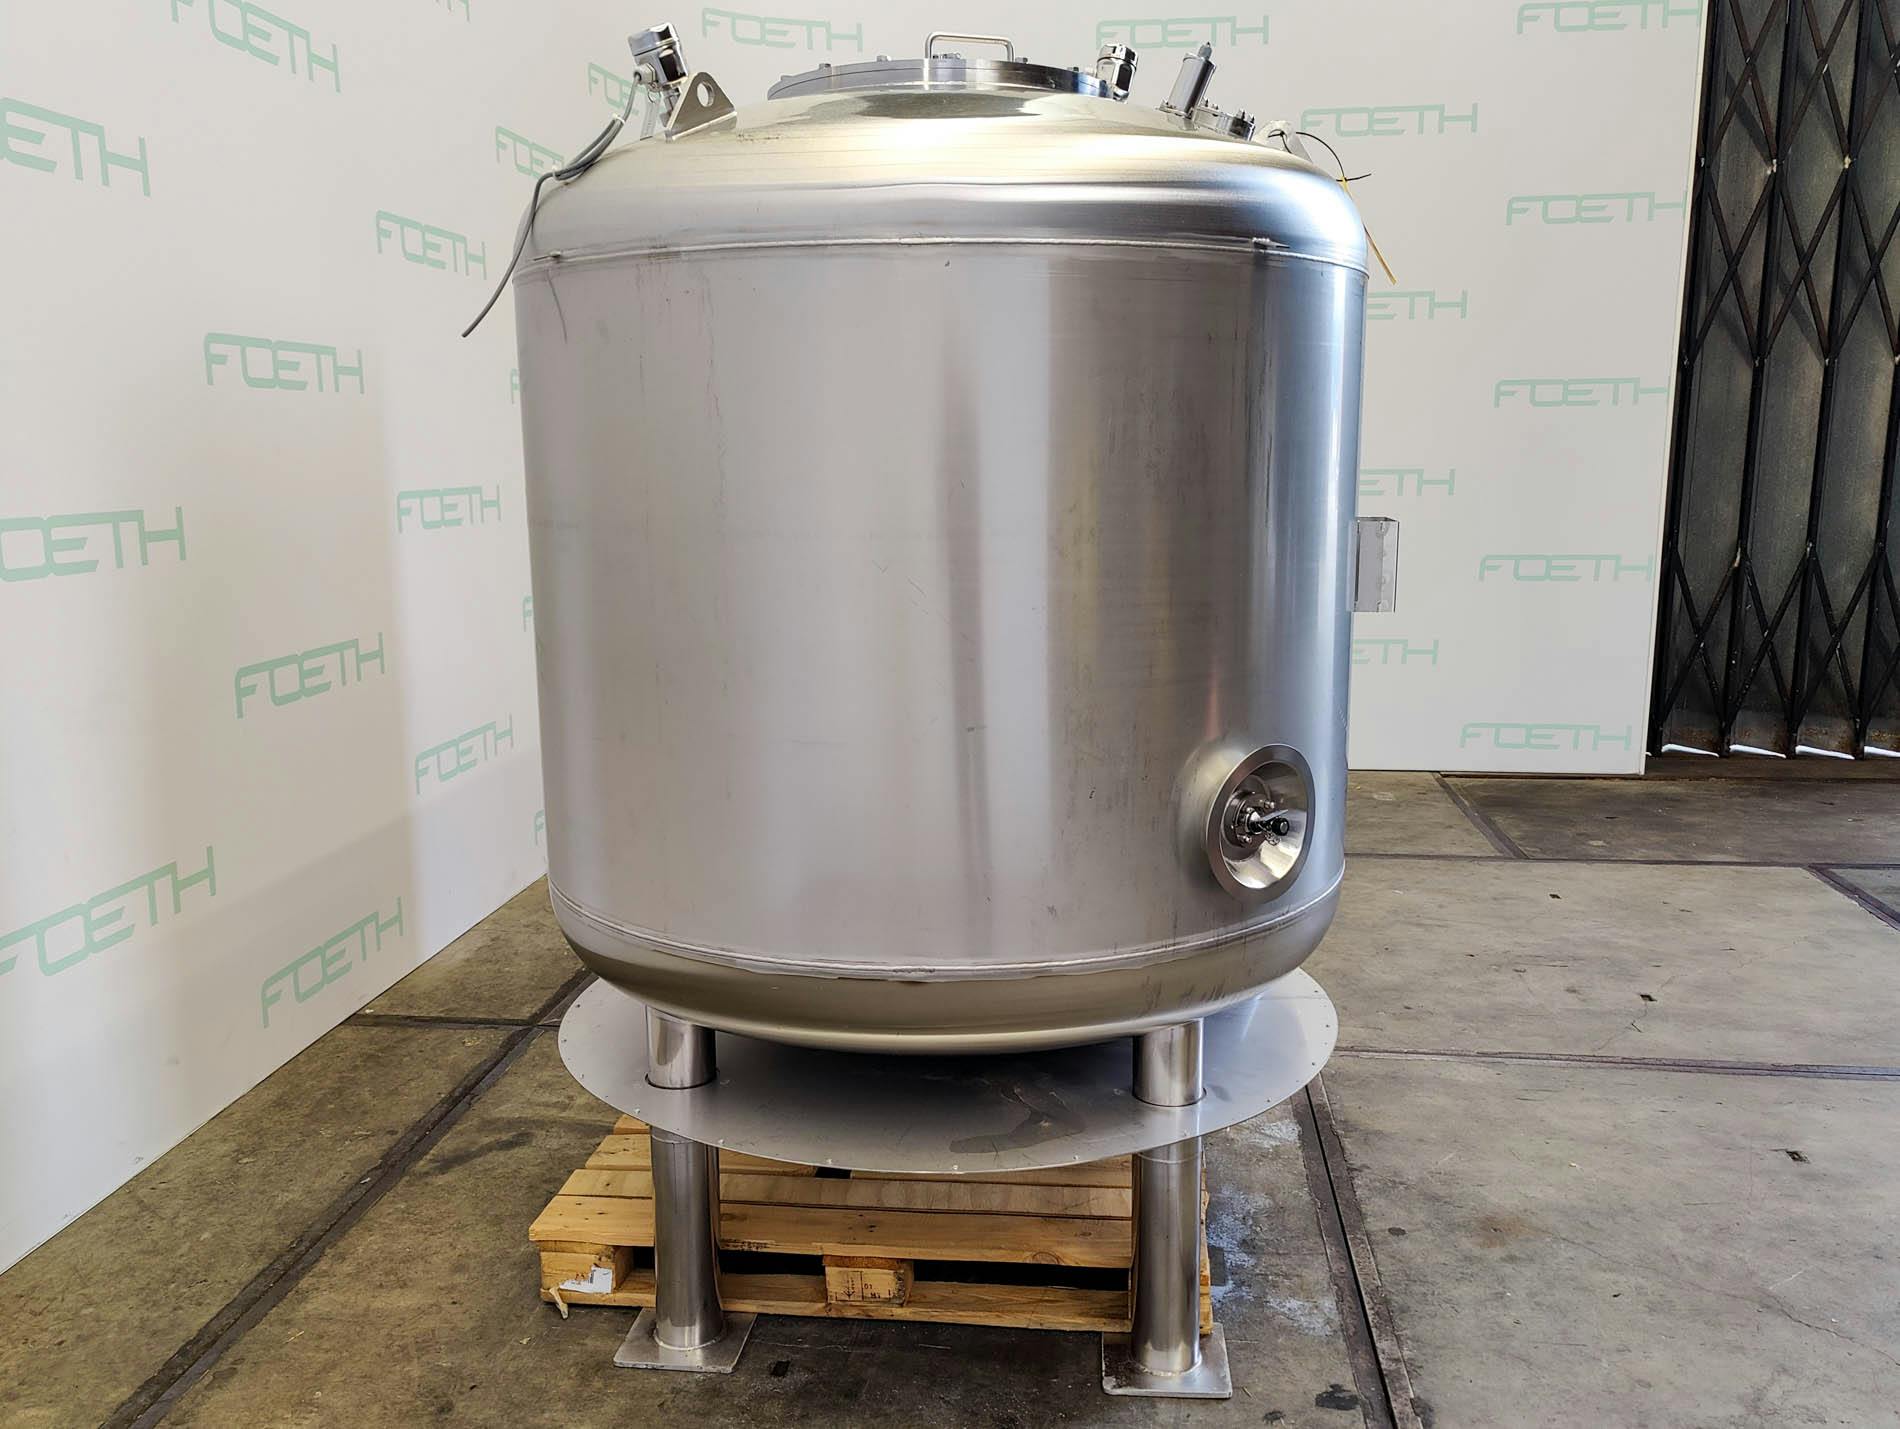 GPI 1960 Ltr"with UV disinfection system" - Druckkessel - image 4